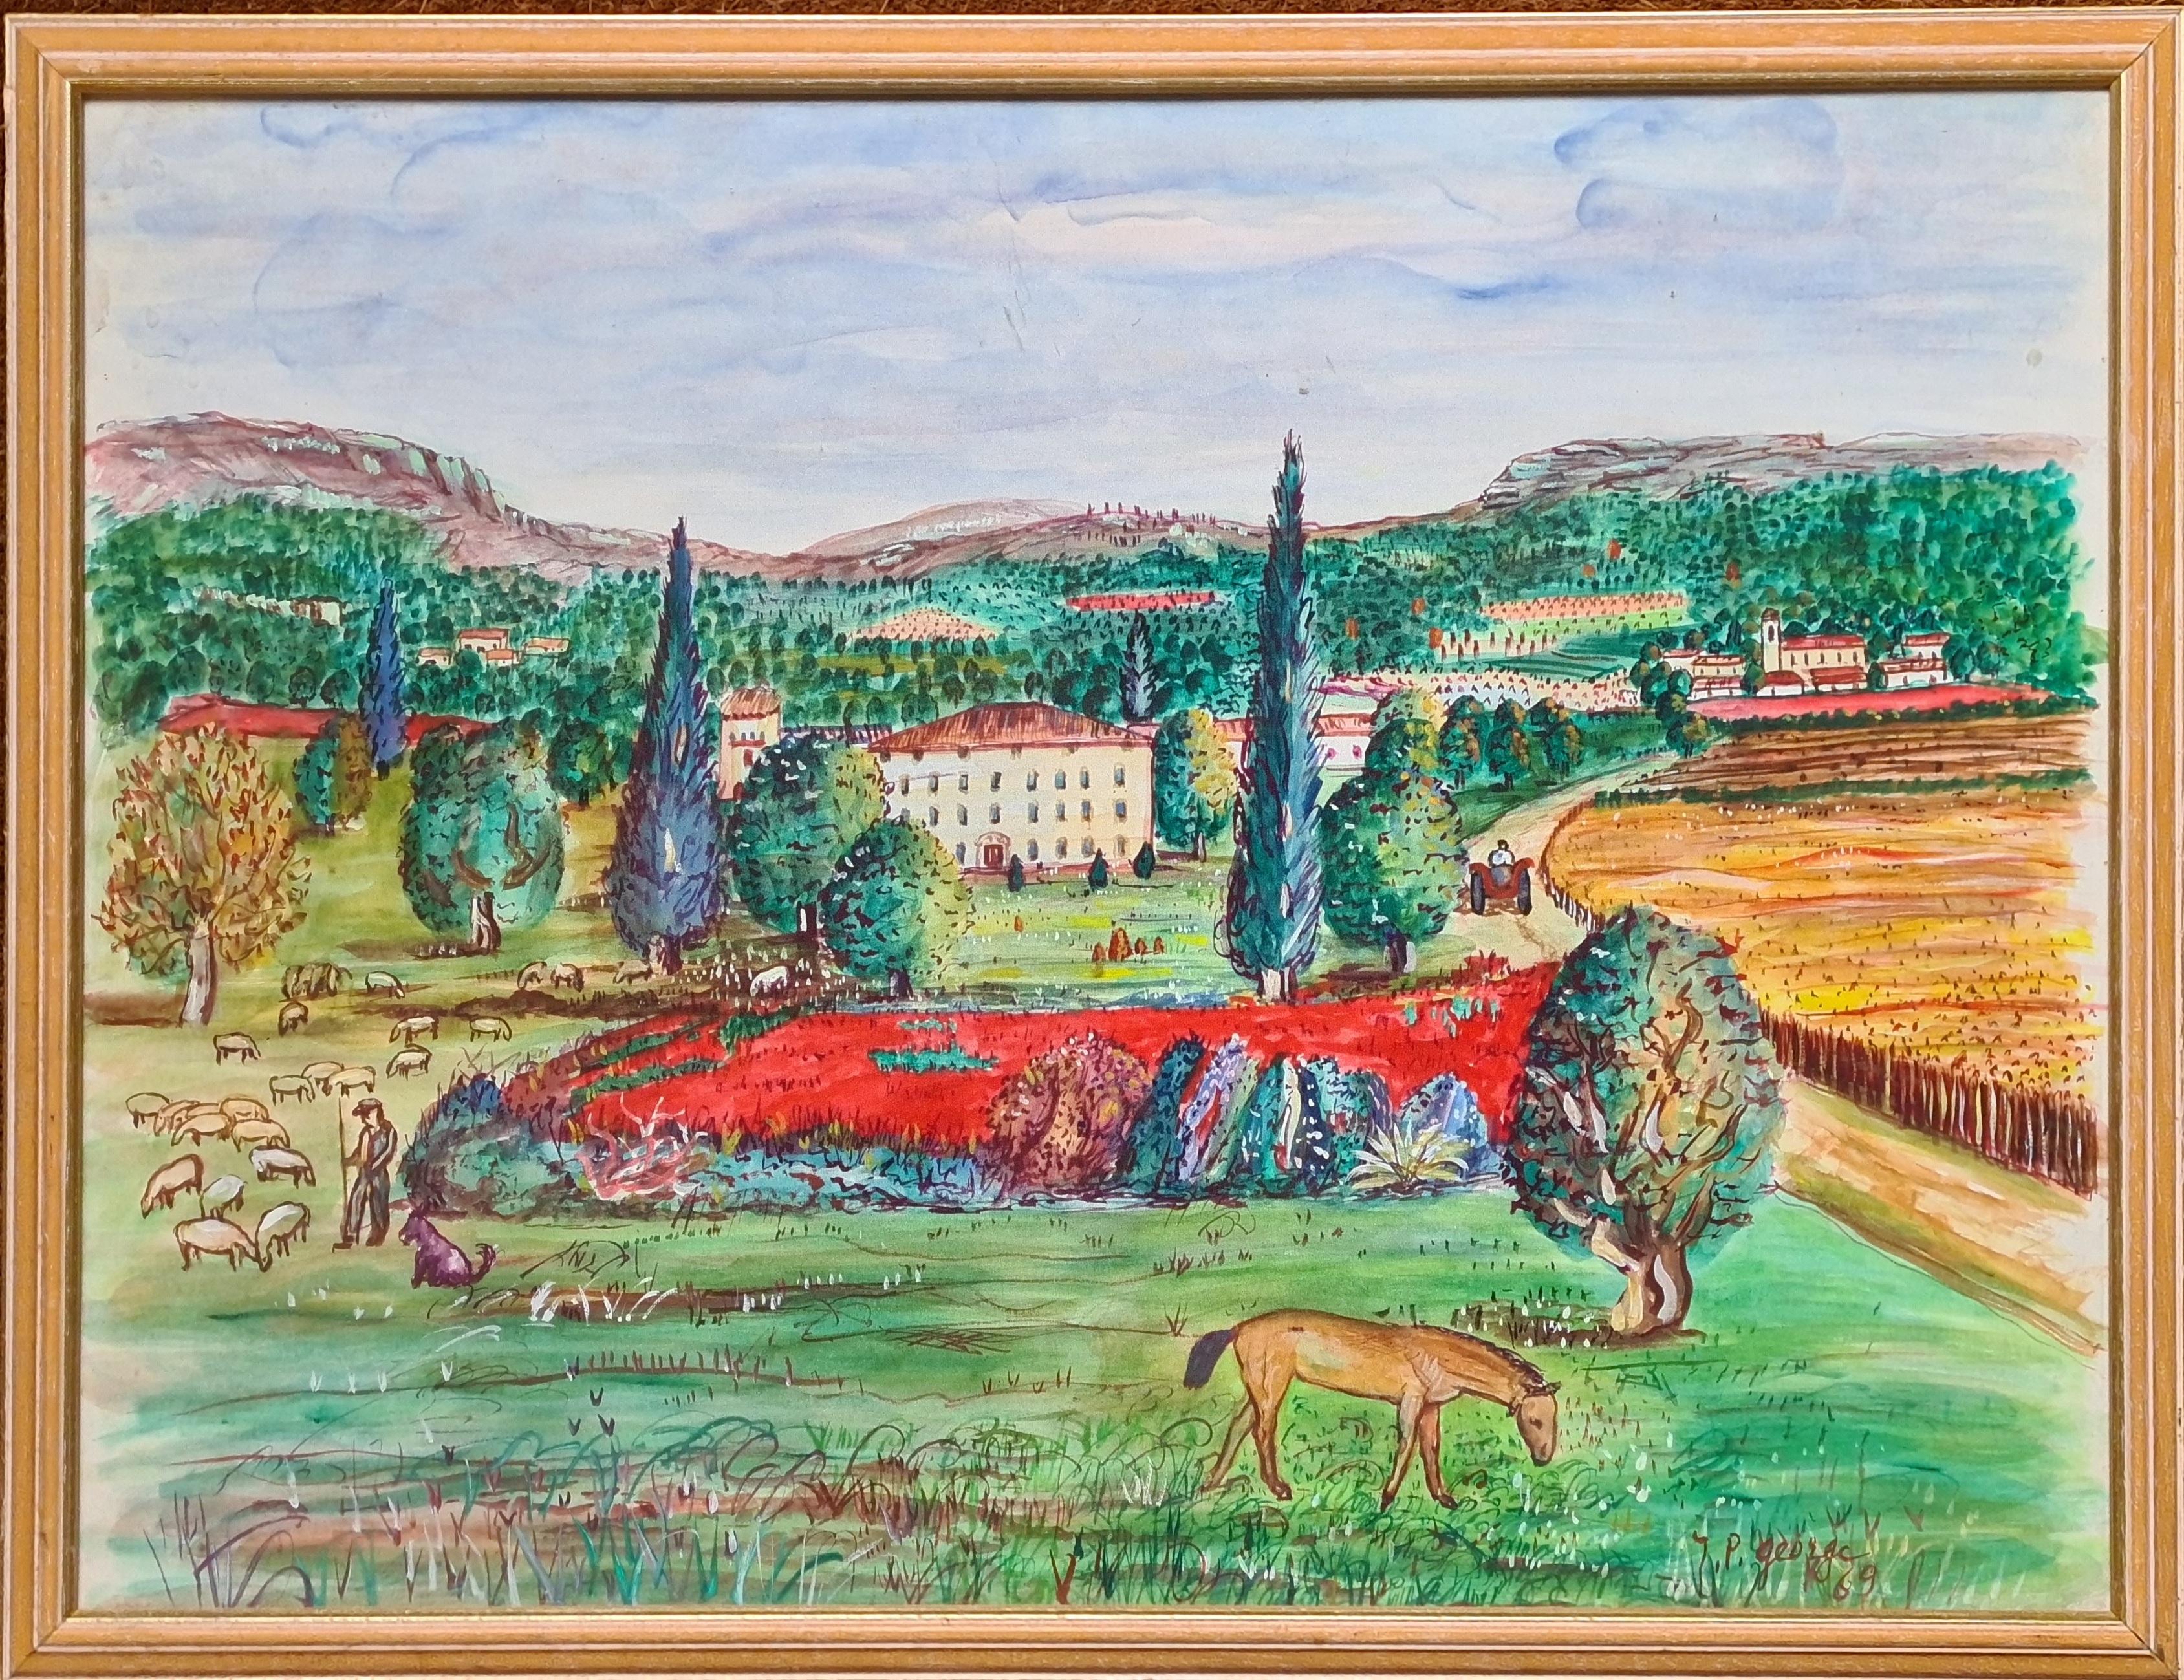 La Bastide et le Champ de Coquelicots, Provence, French Rural Scene by JP George - Art by Yves Brayer